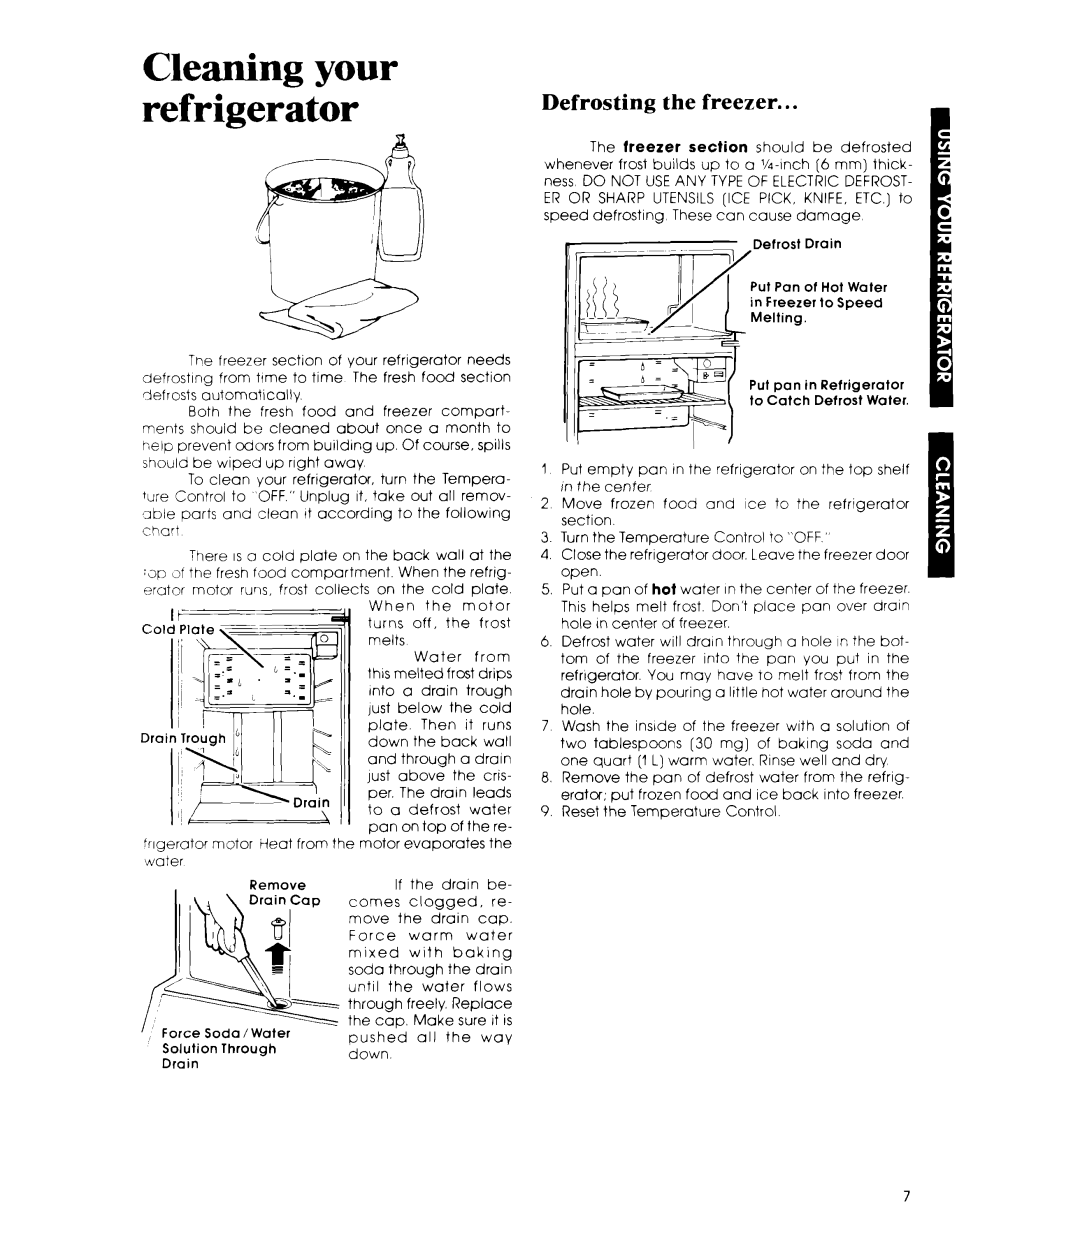 Whirlpool ET12DC, ET14DC manual Cleaning your refrigerator 2%, Defrosting the freezer 